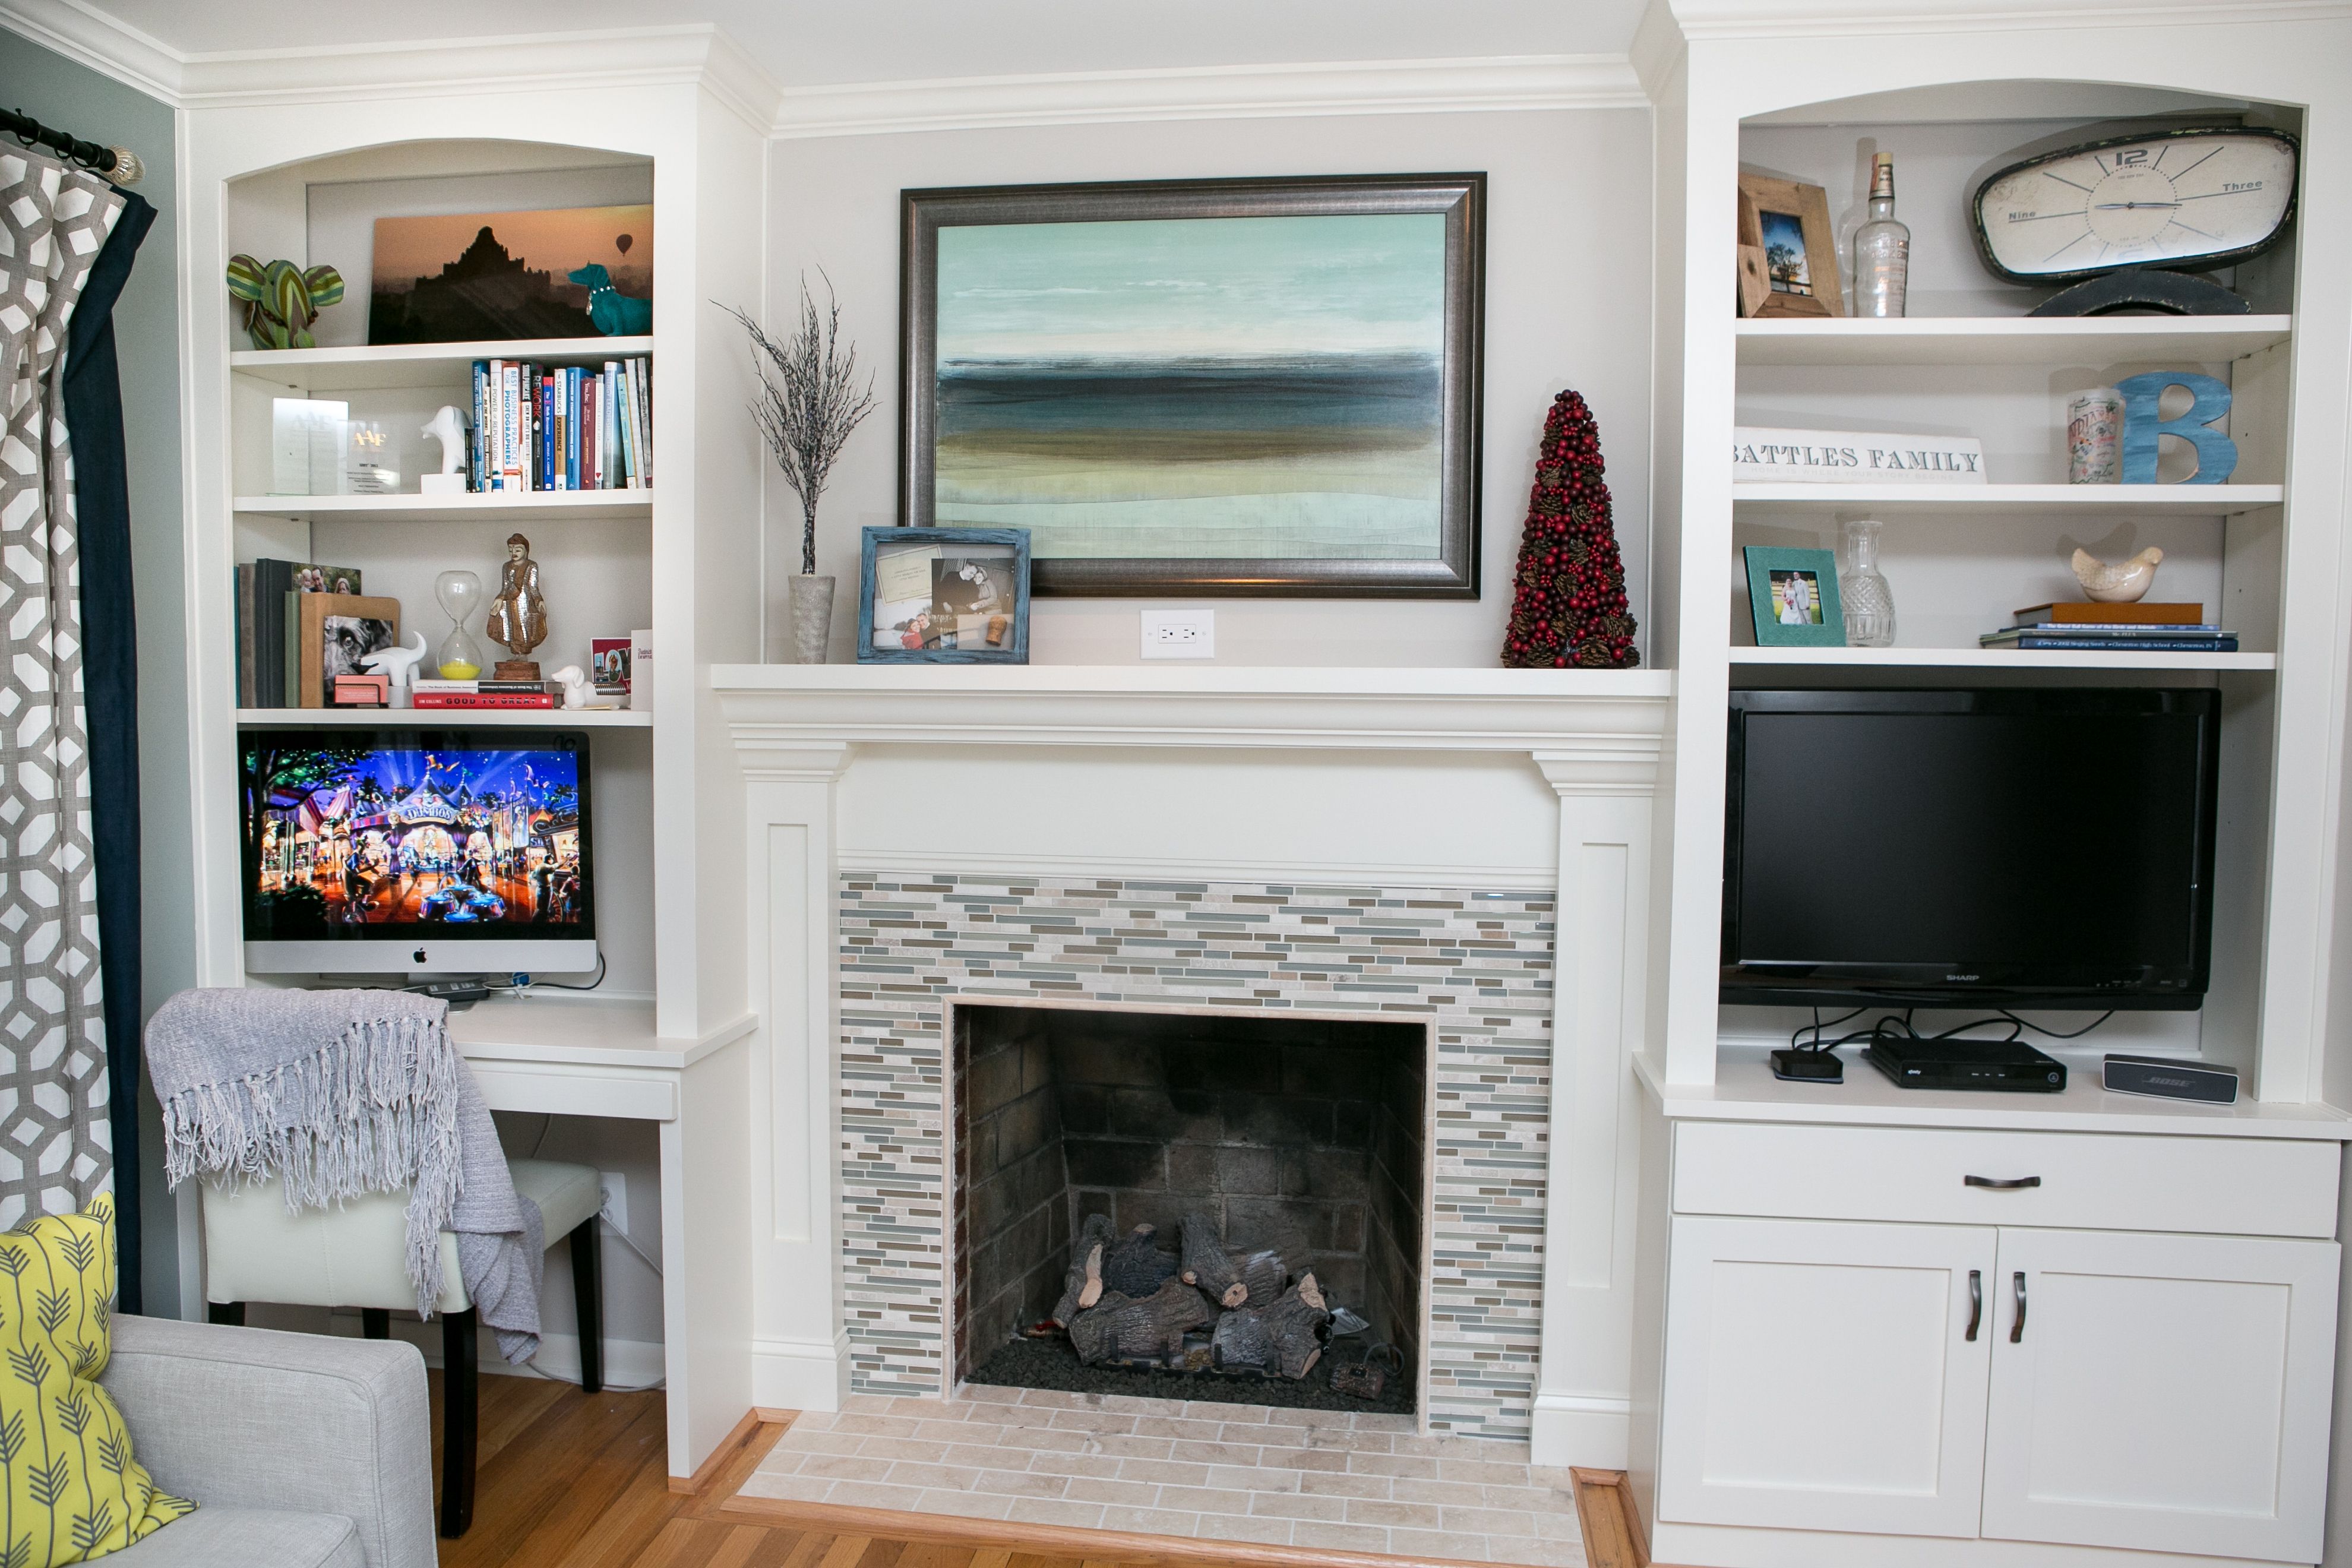 Jcpenney Fireplace Best Of Cynthia Stacks Cstacks45 On Pinterest